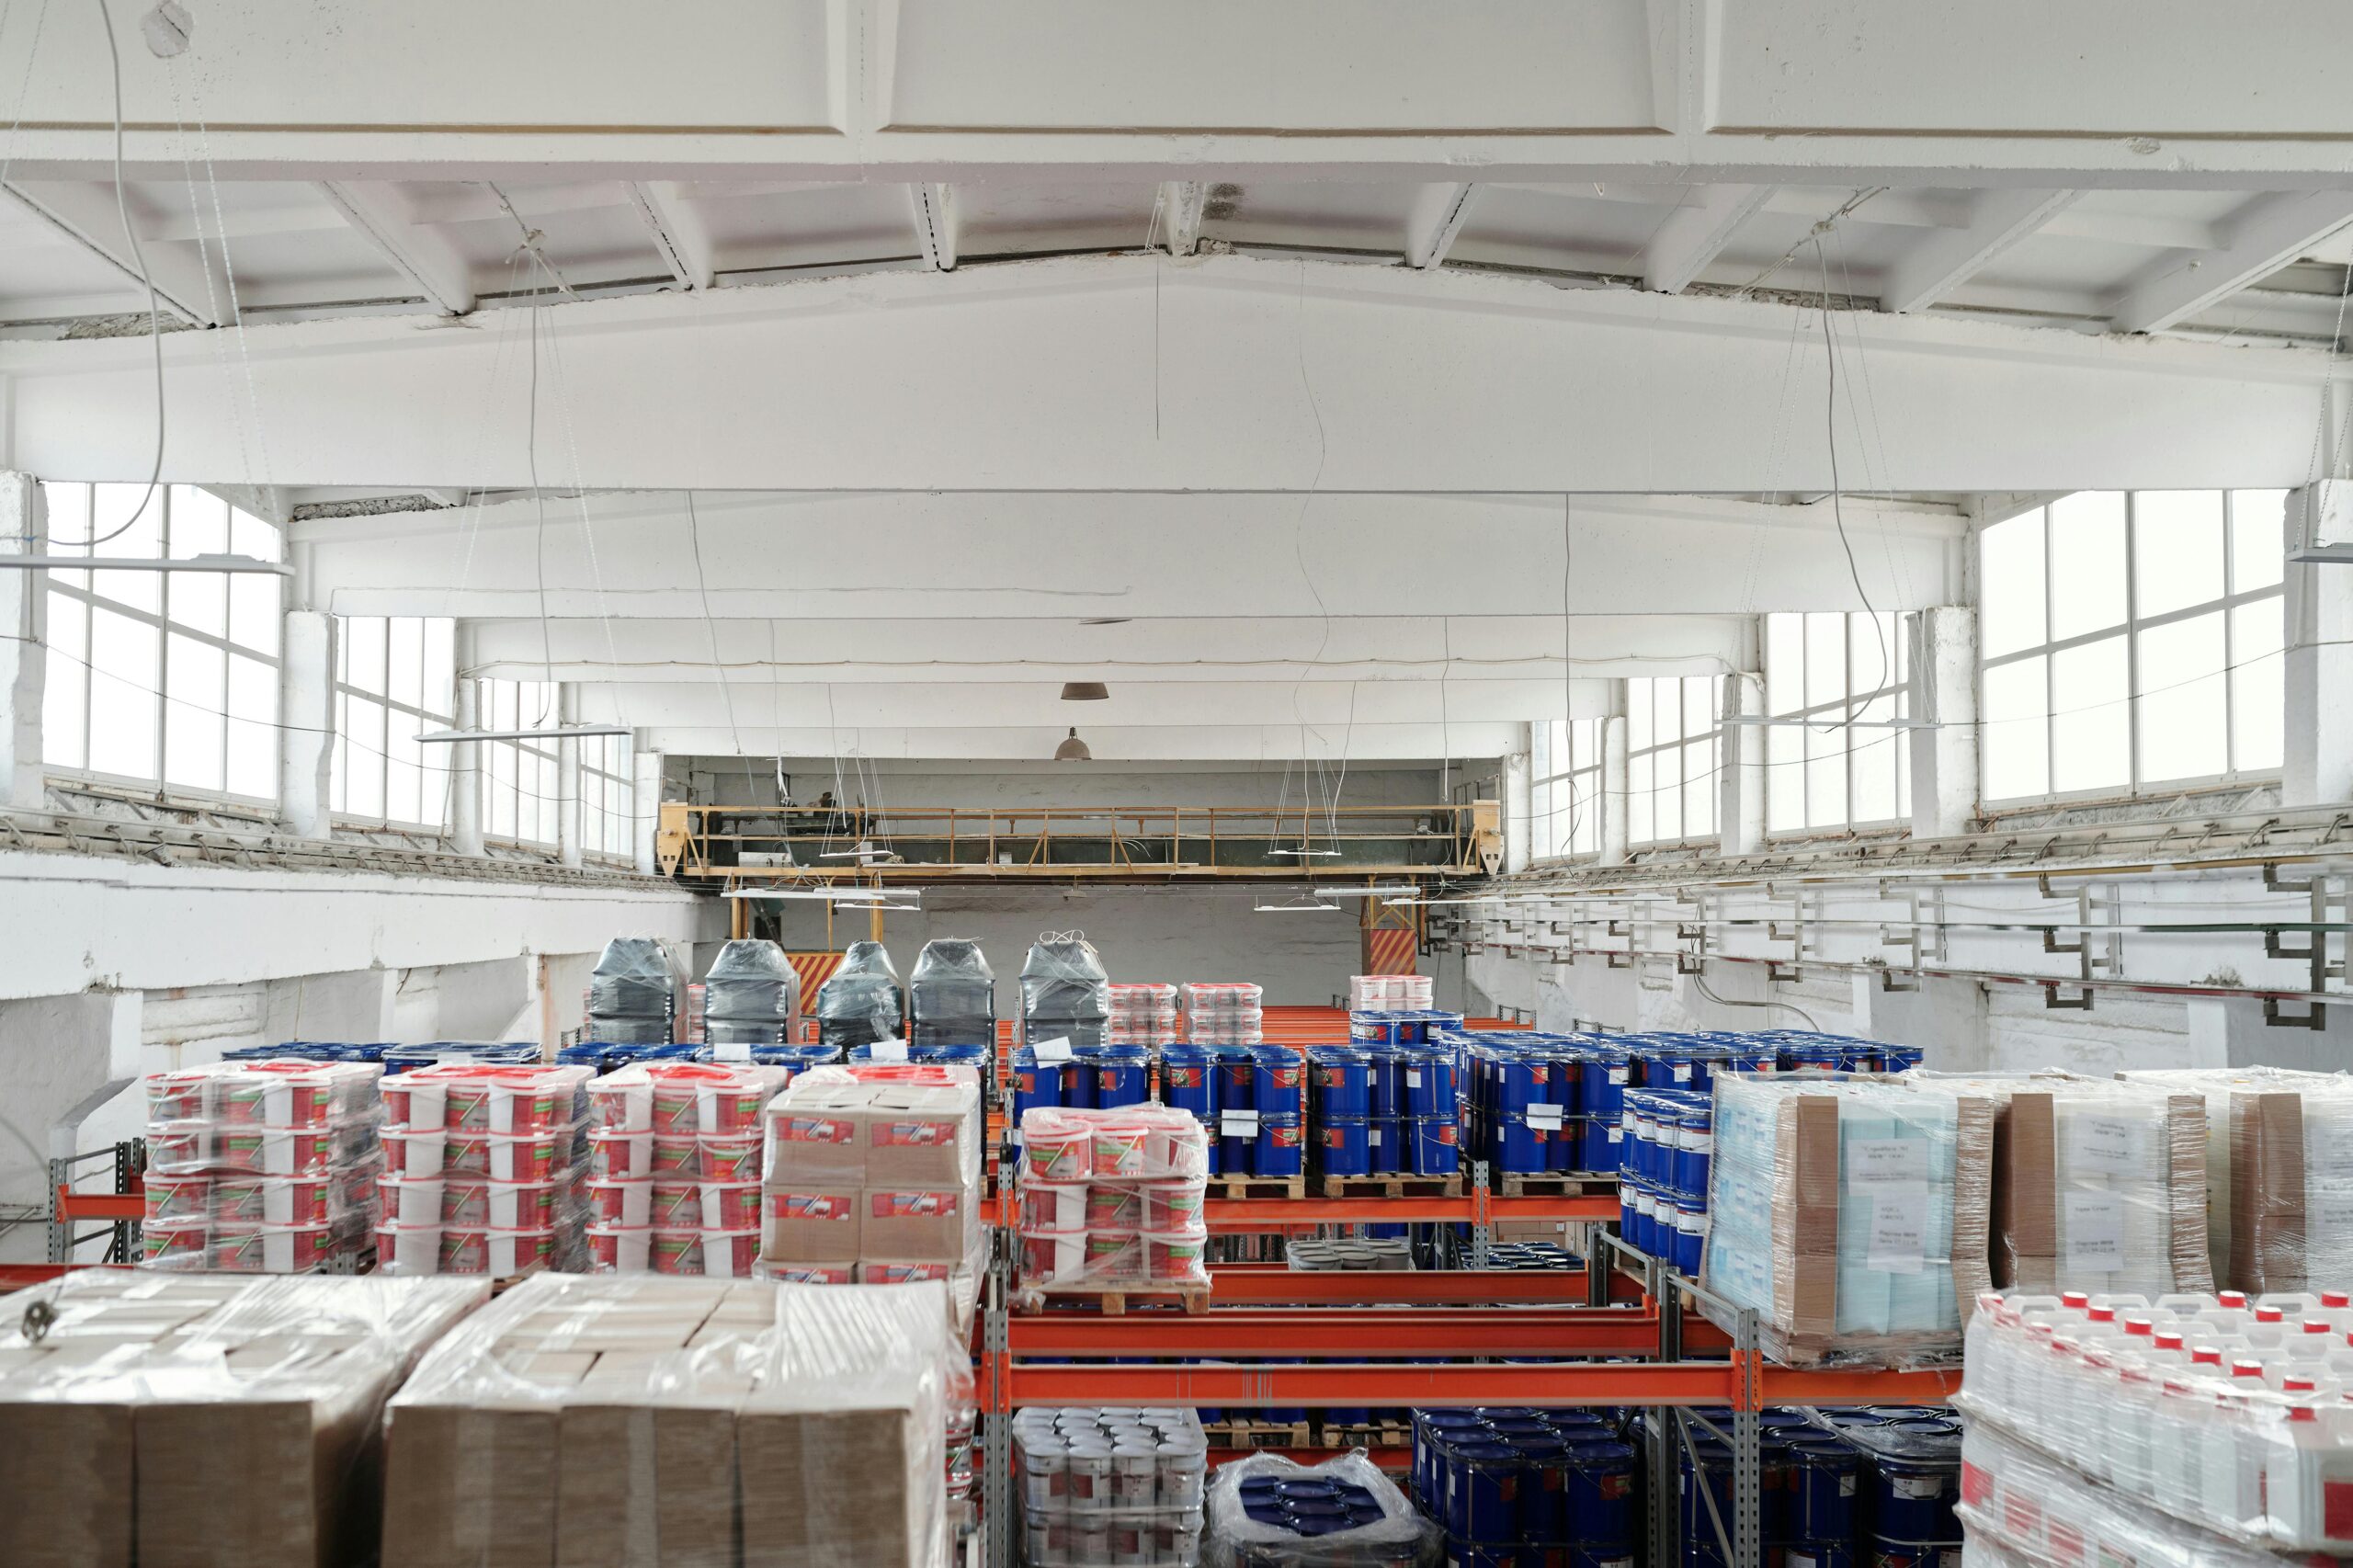 The interior of a warehouse facility optimized for cross-docking services.